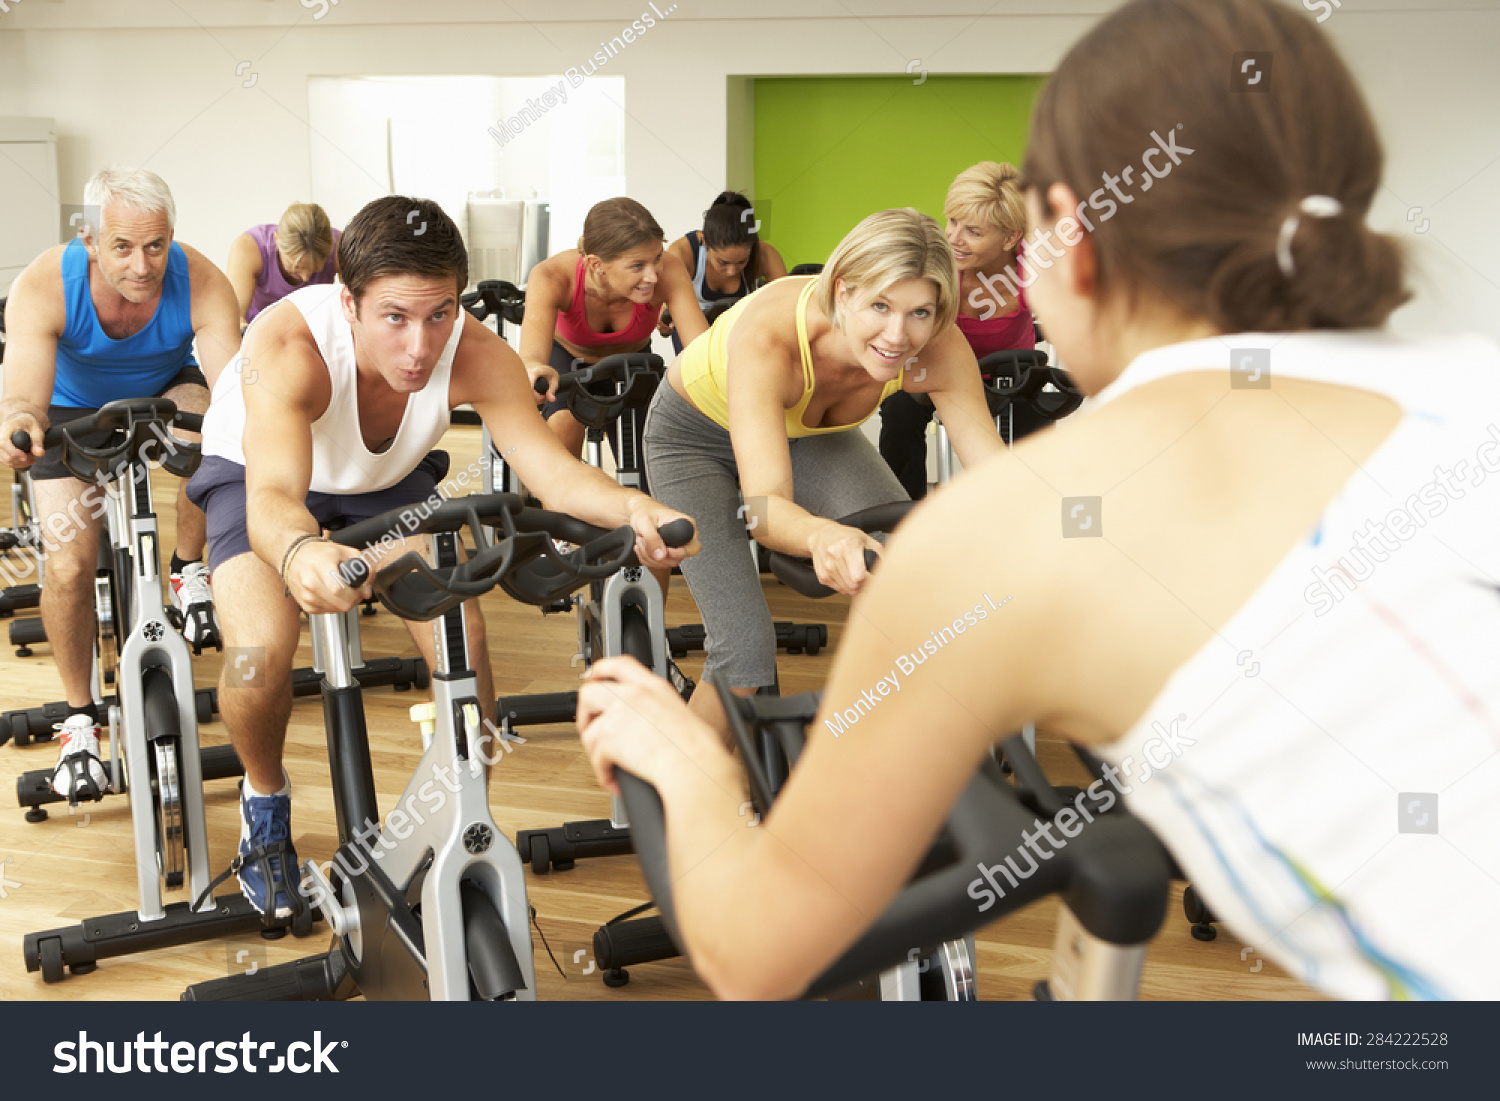 Group Taking Part In Spinning Class In Gym #284222528